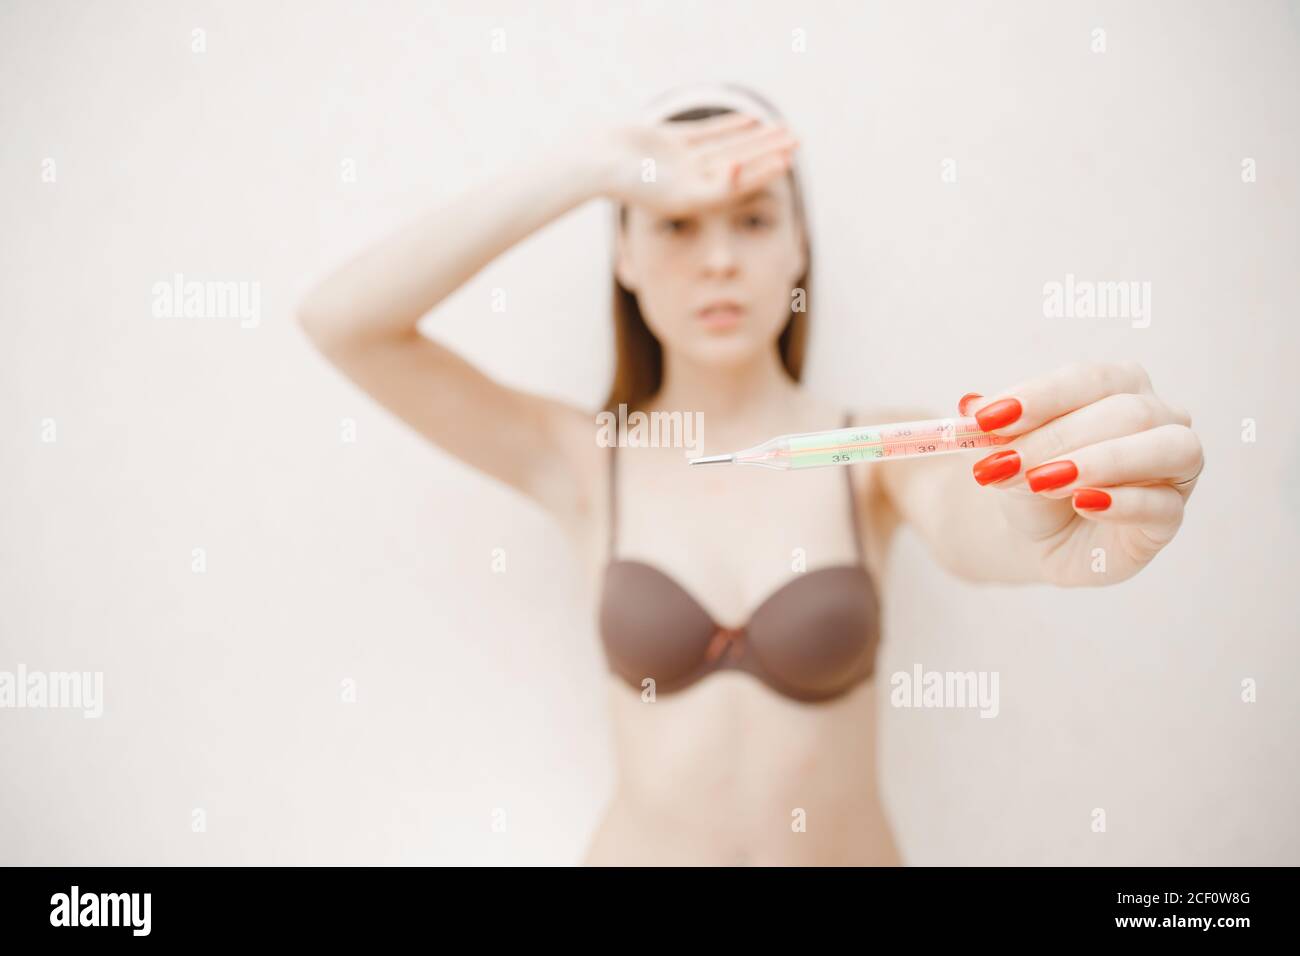 Portrait young woman with chickenpox lying in bed and measuring temperature Stock Photo